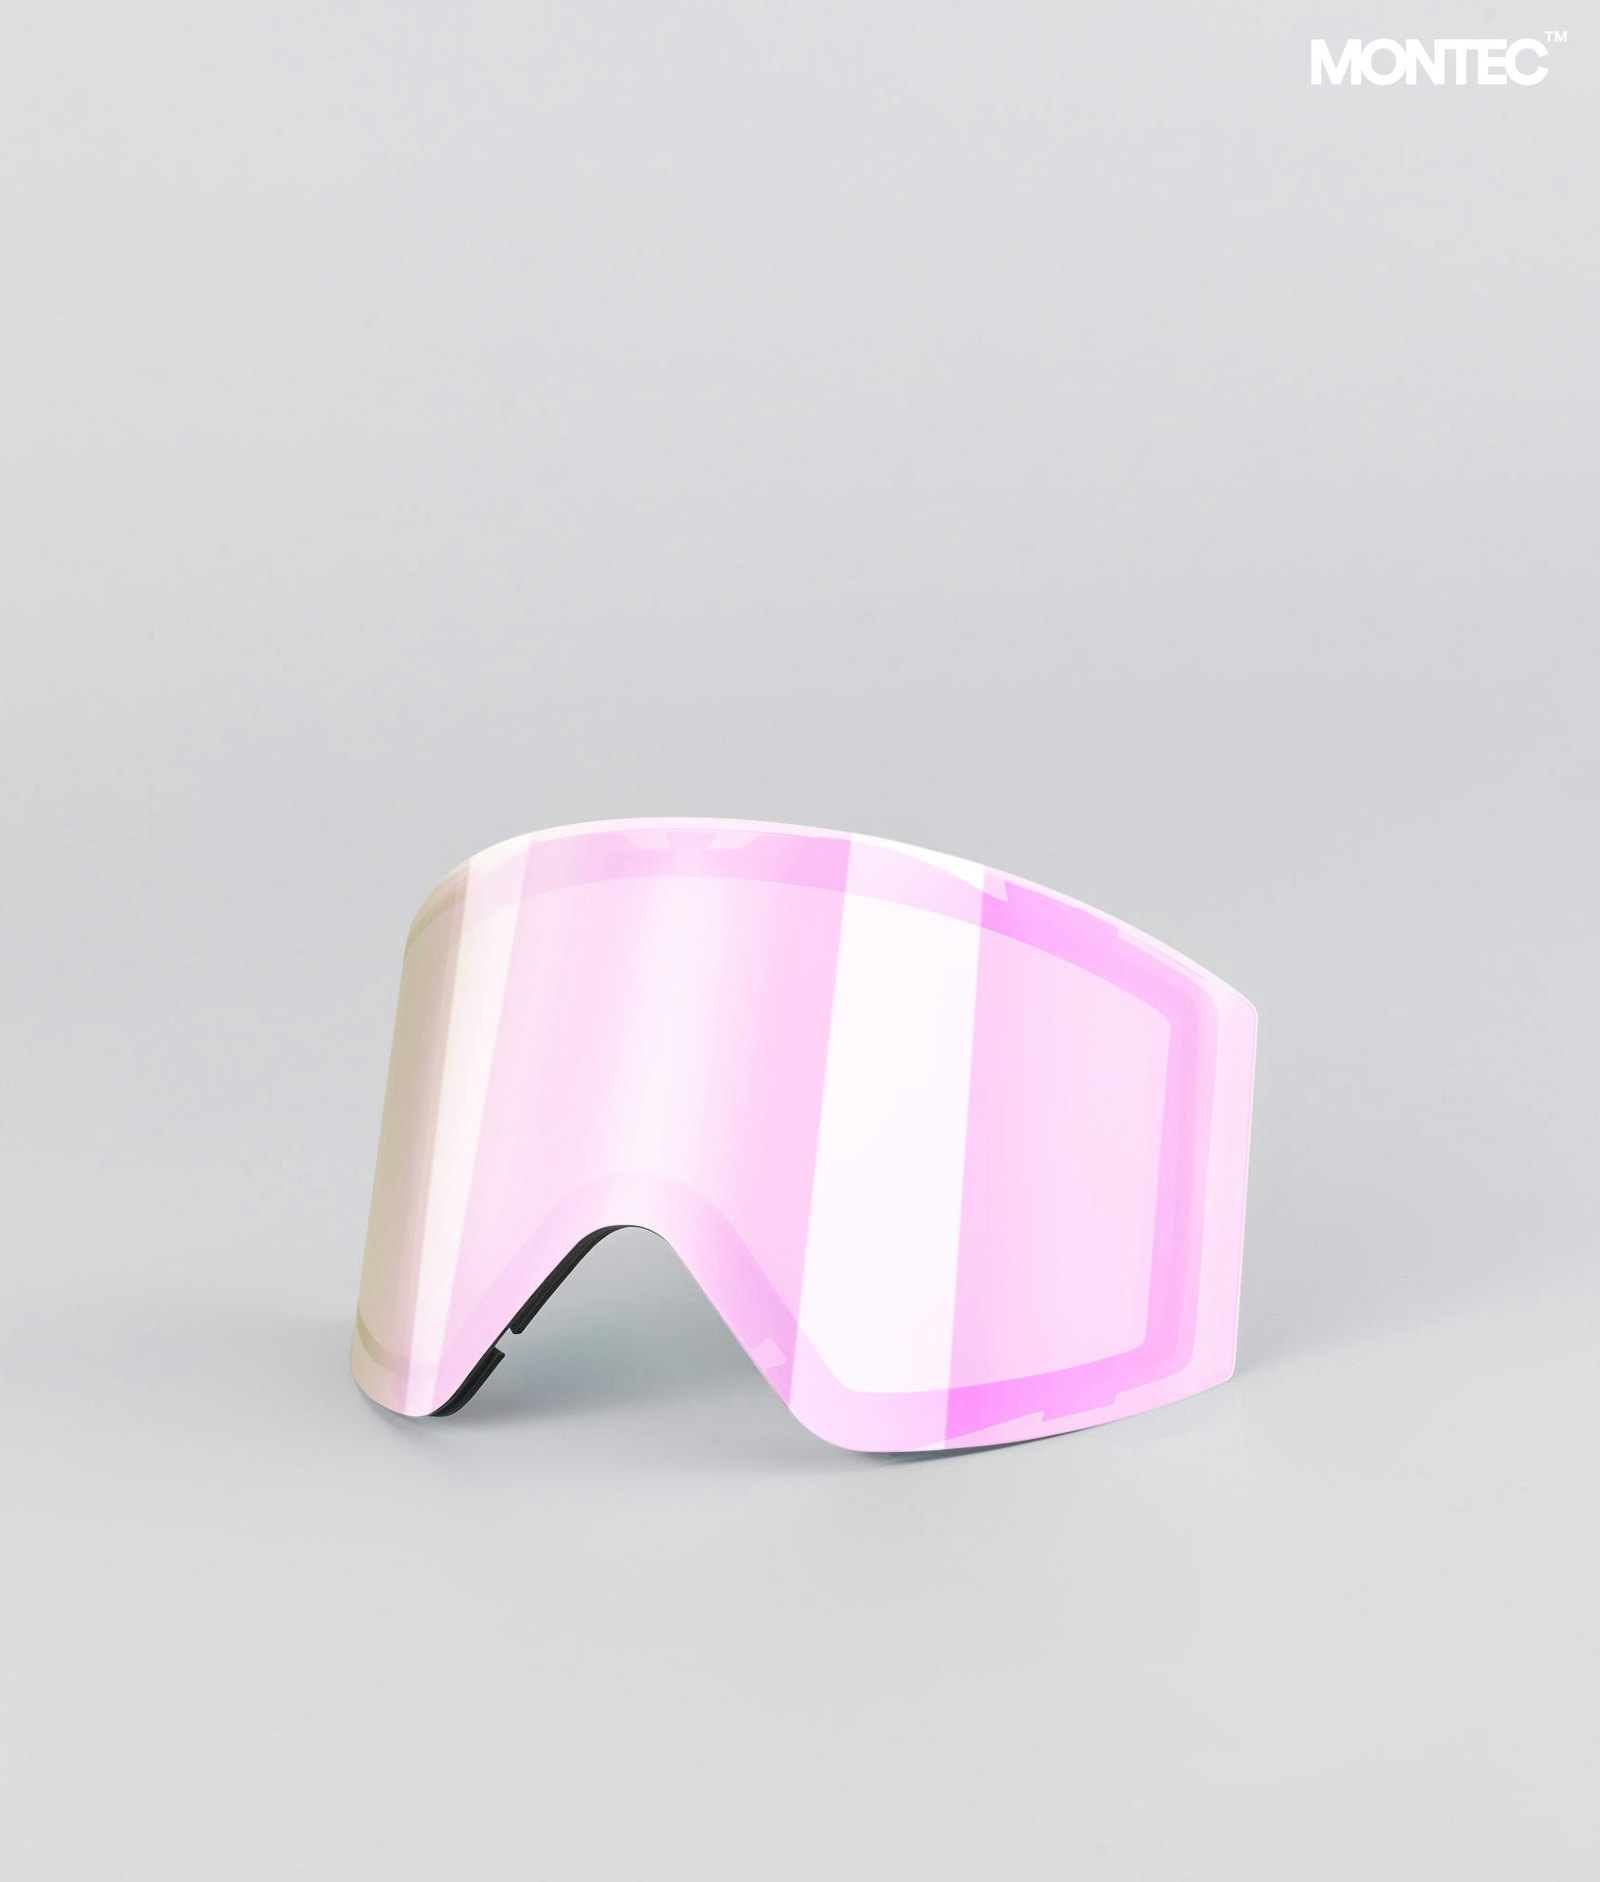 Montec Scope 2020 Goggle Lens Large Replacement Lens Ski Pink Sapphire